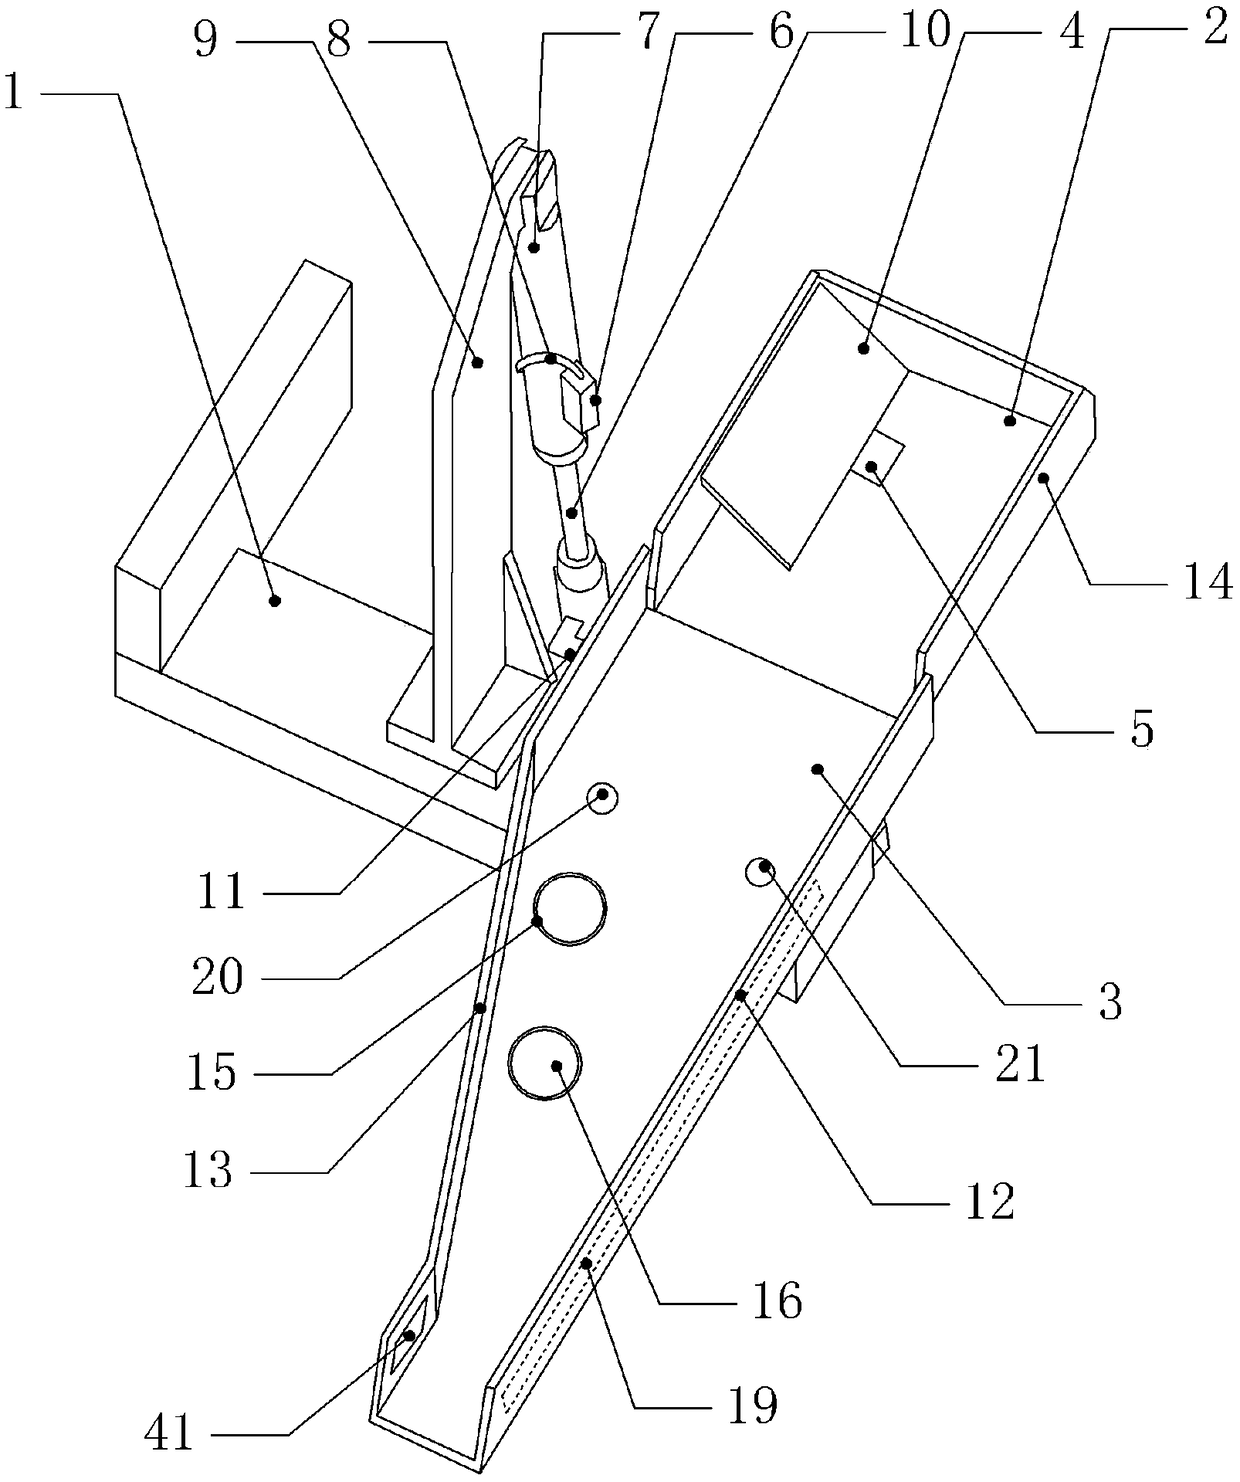 Automatic material receiving device for machine tool materials